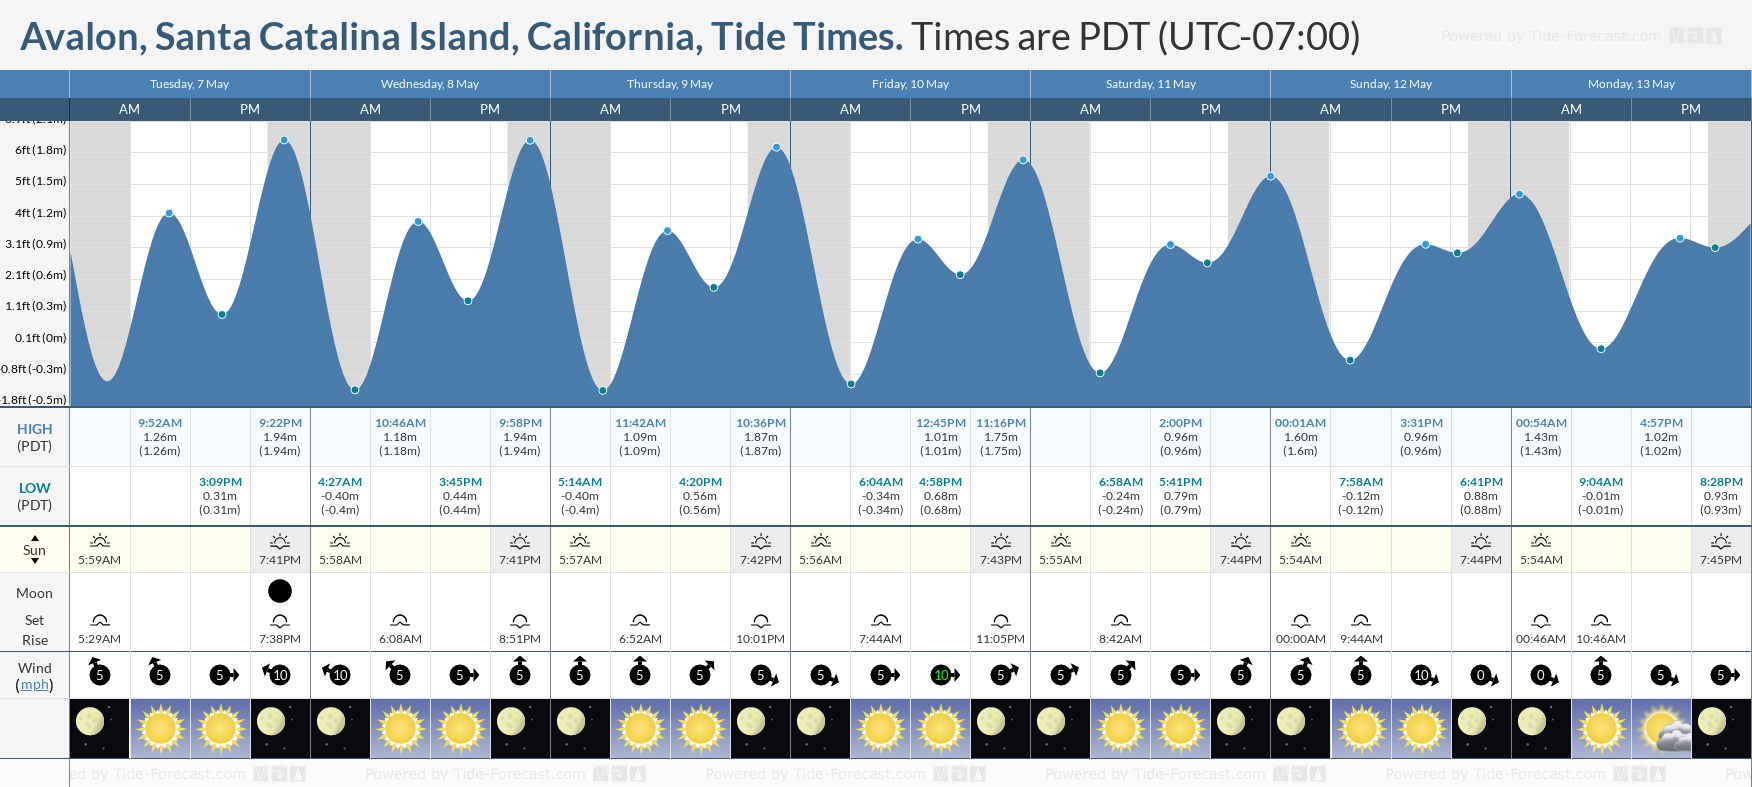 Avalon, Santa Catalina Island, California Tide Chart including high and low tide tide times for the next 7 days